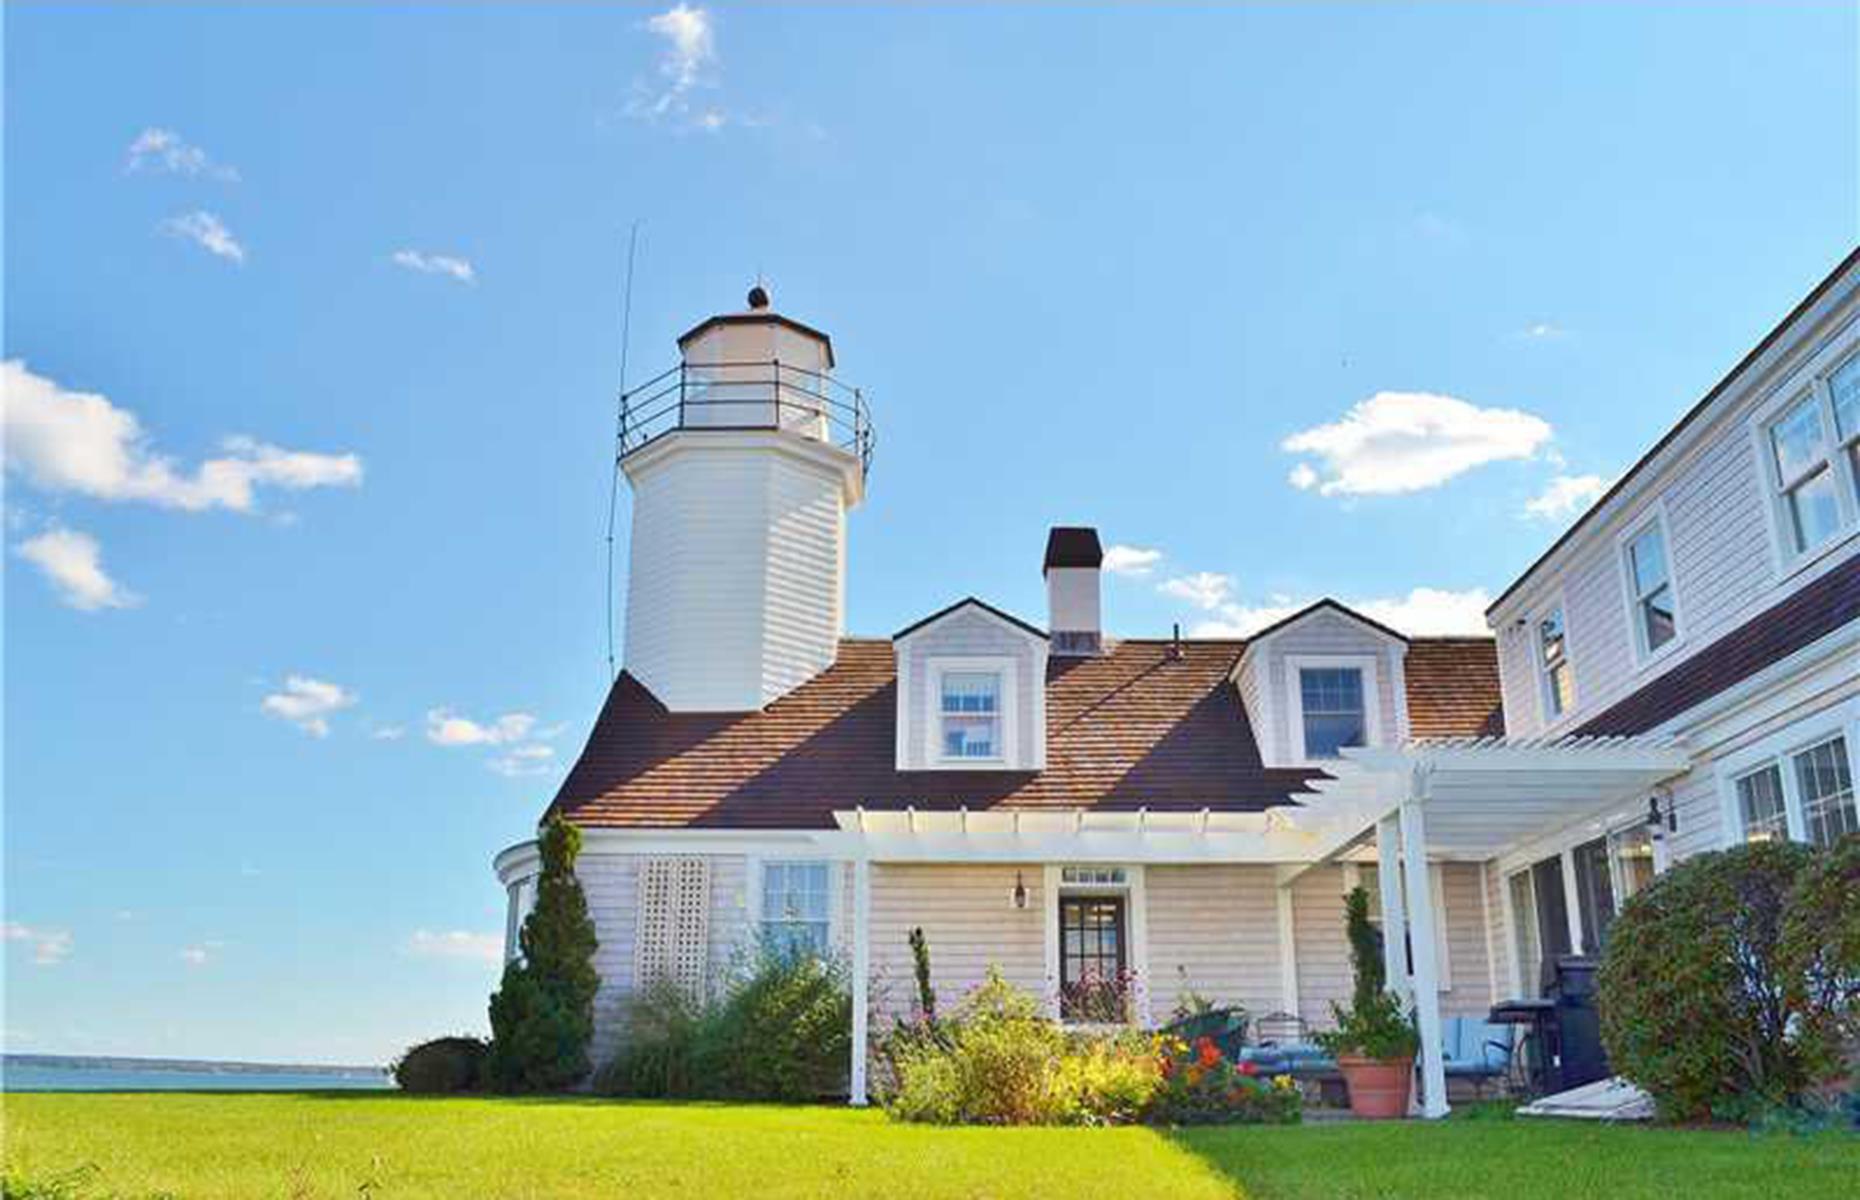 Poplar Point lighthouse, USA: The world's most romantic lighthouse conversions